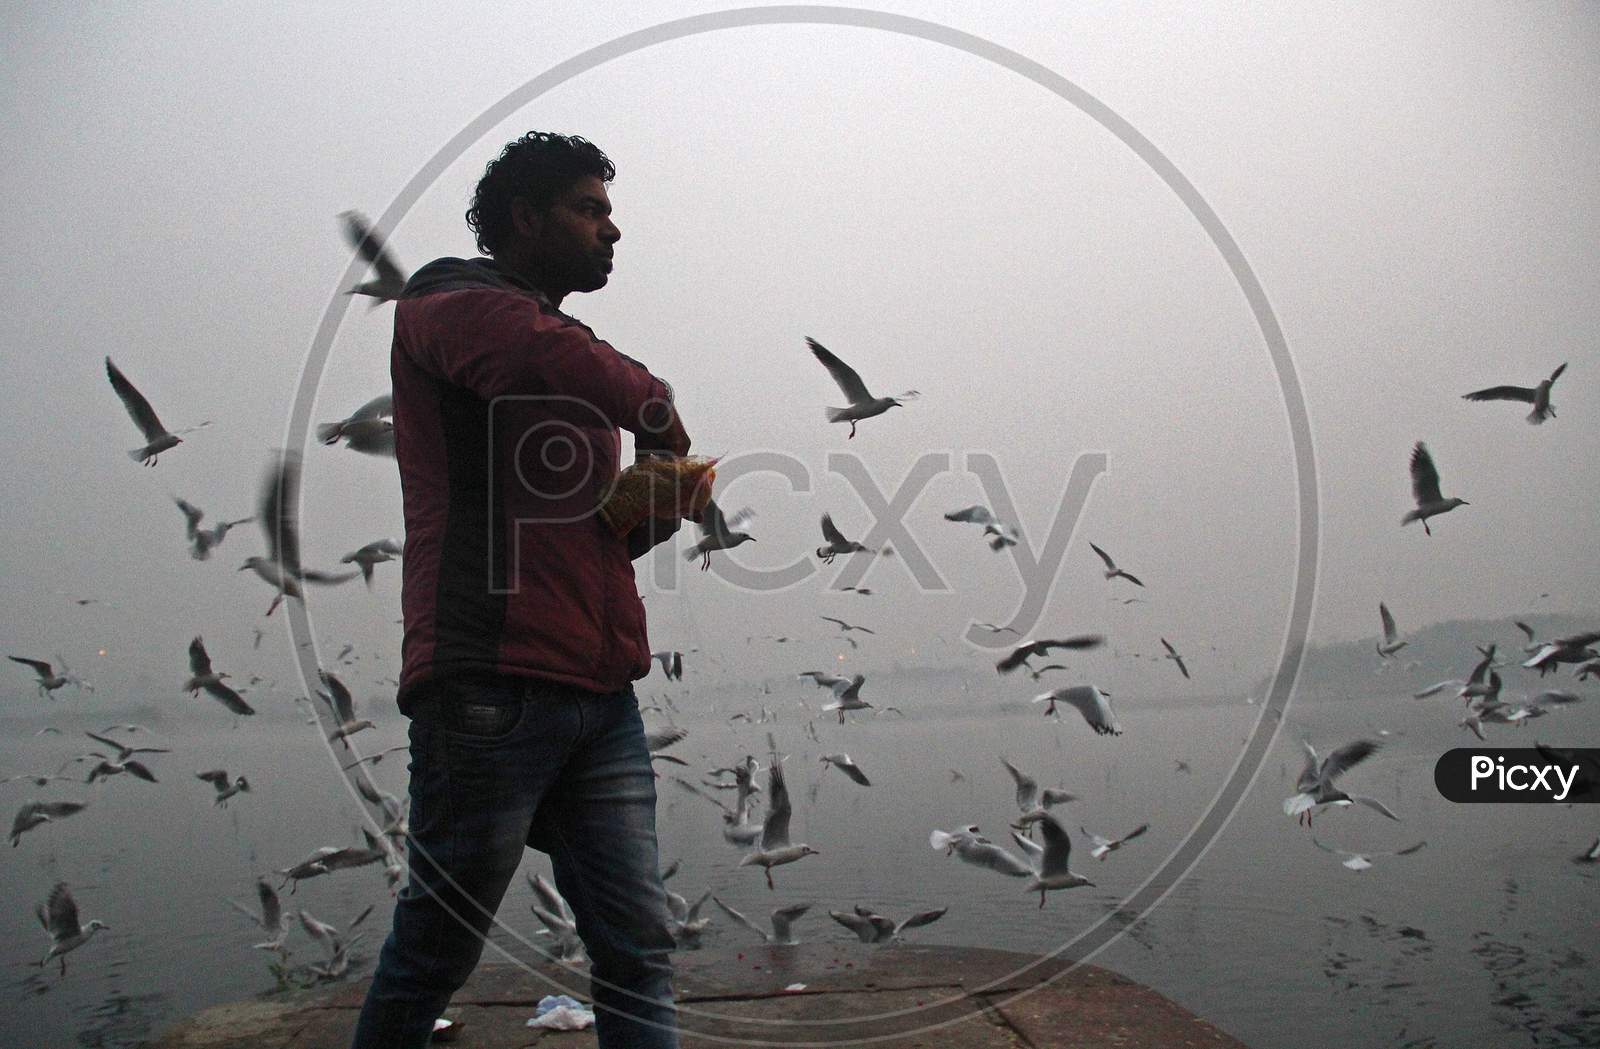 A man feeds seagulls at the Yamuna river on a smoggy morning in New Delhi, November 9, 2020.